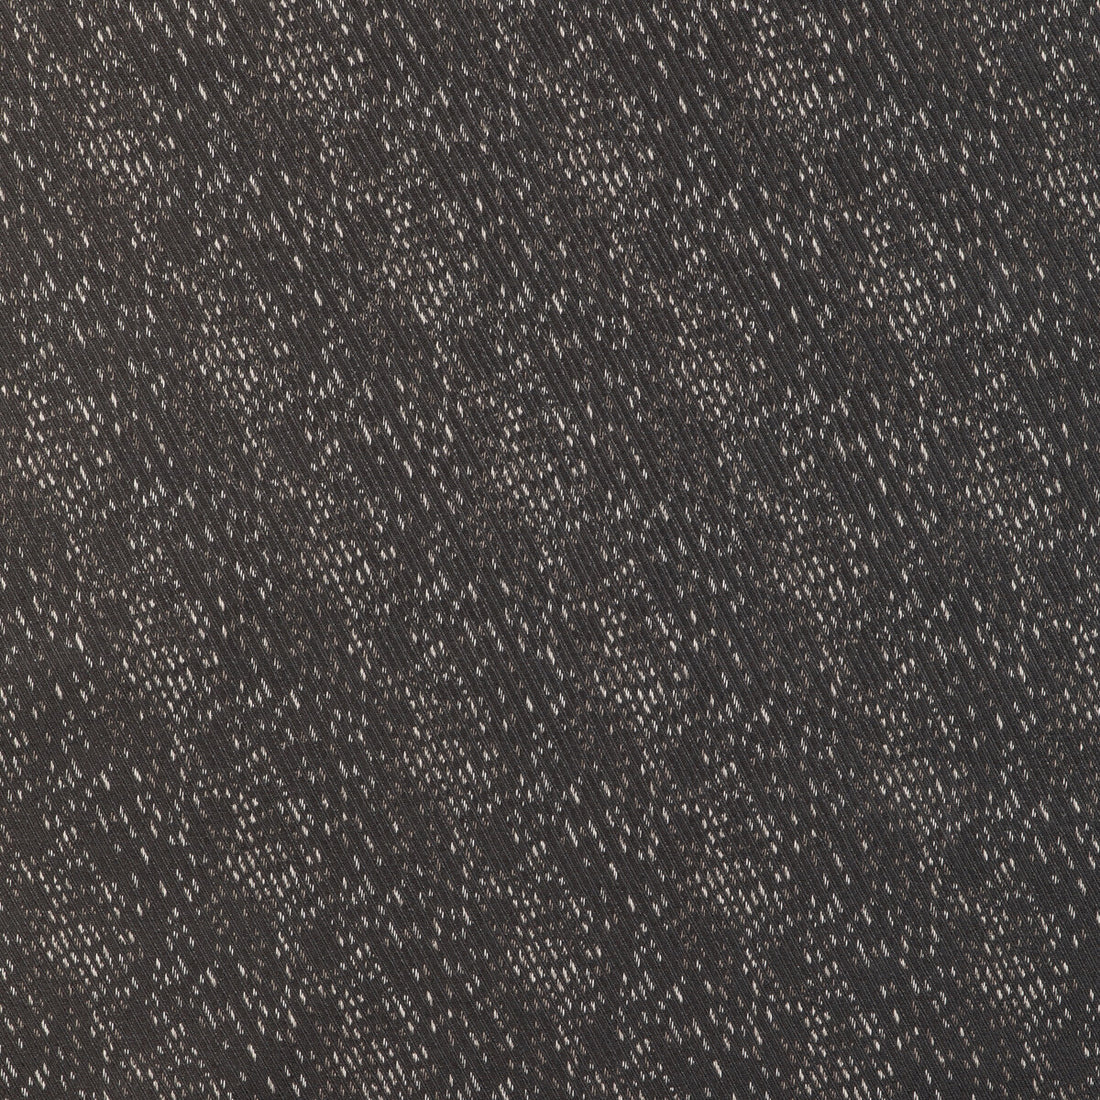 Hana fabric in graphite color - pattern GWF-3800.811.0 - by Lee Jofa Modern in the Kelly Wearstler VIII collection